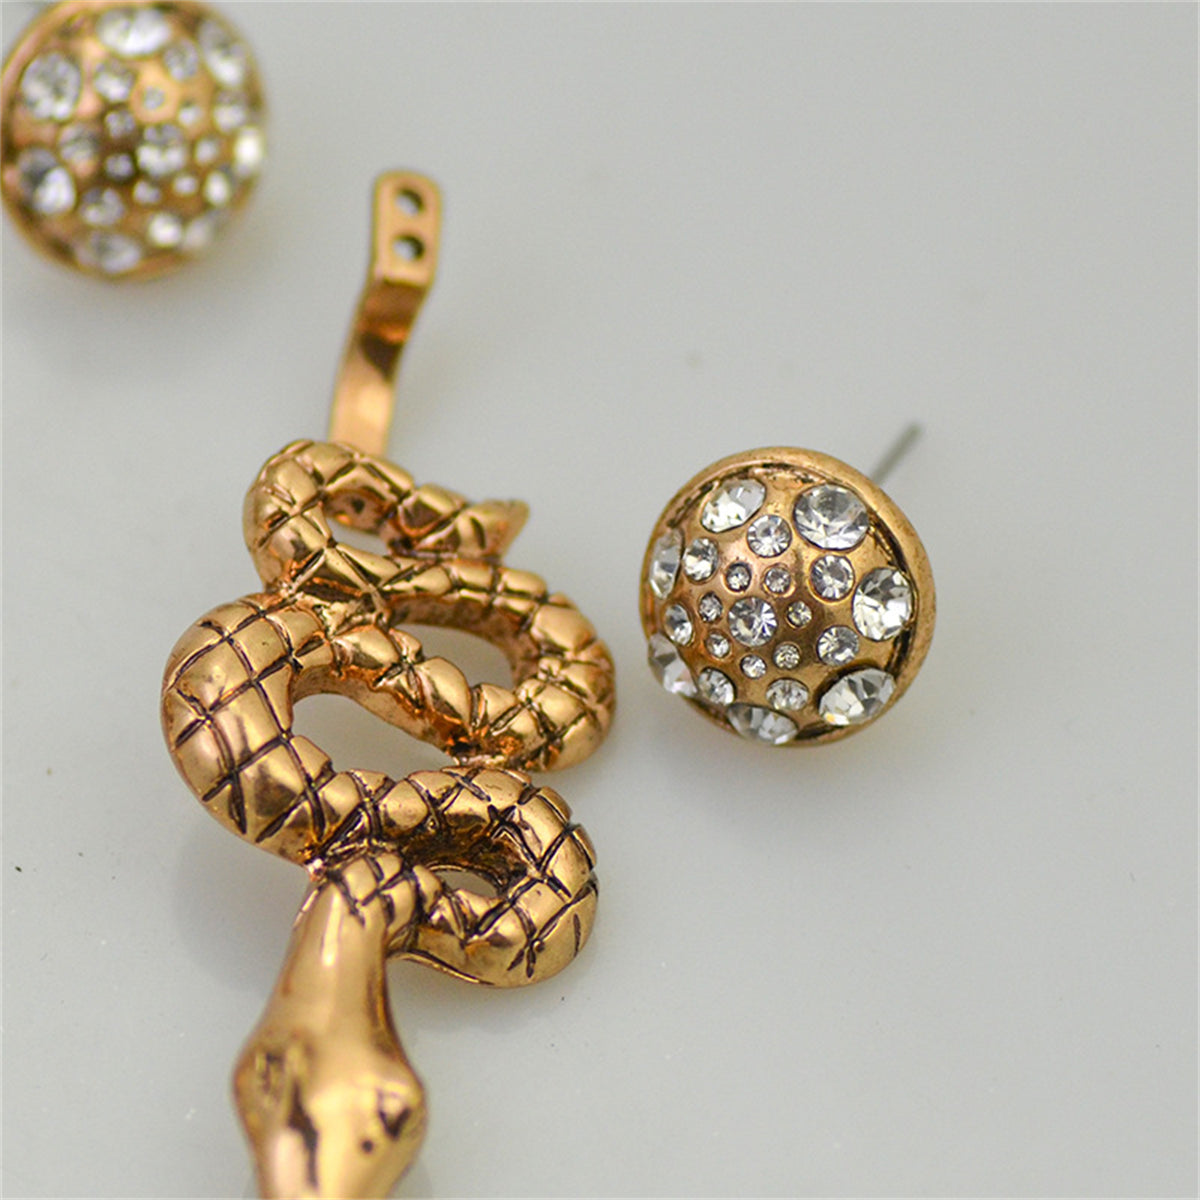 Cubic Zirconia & 18K Gold-Plated Snake Ear Jackets